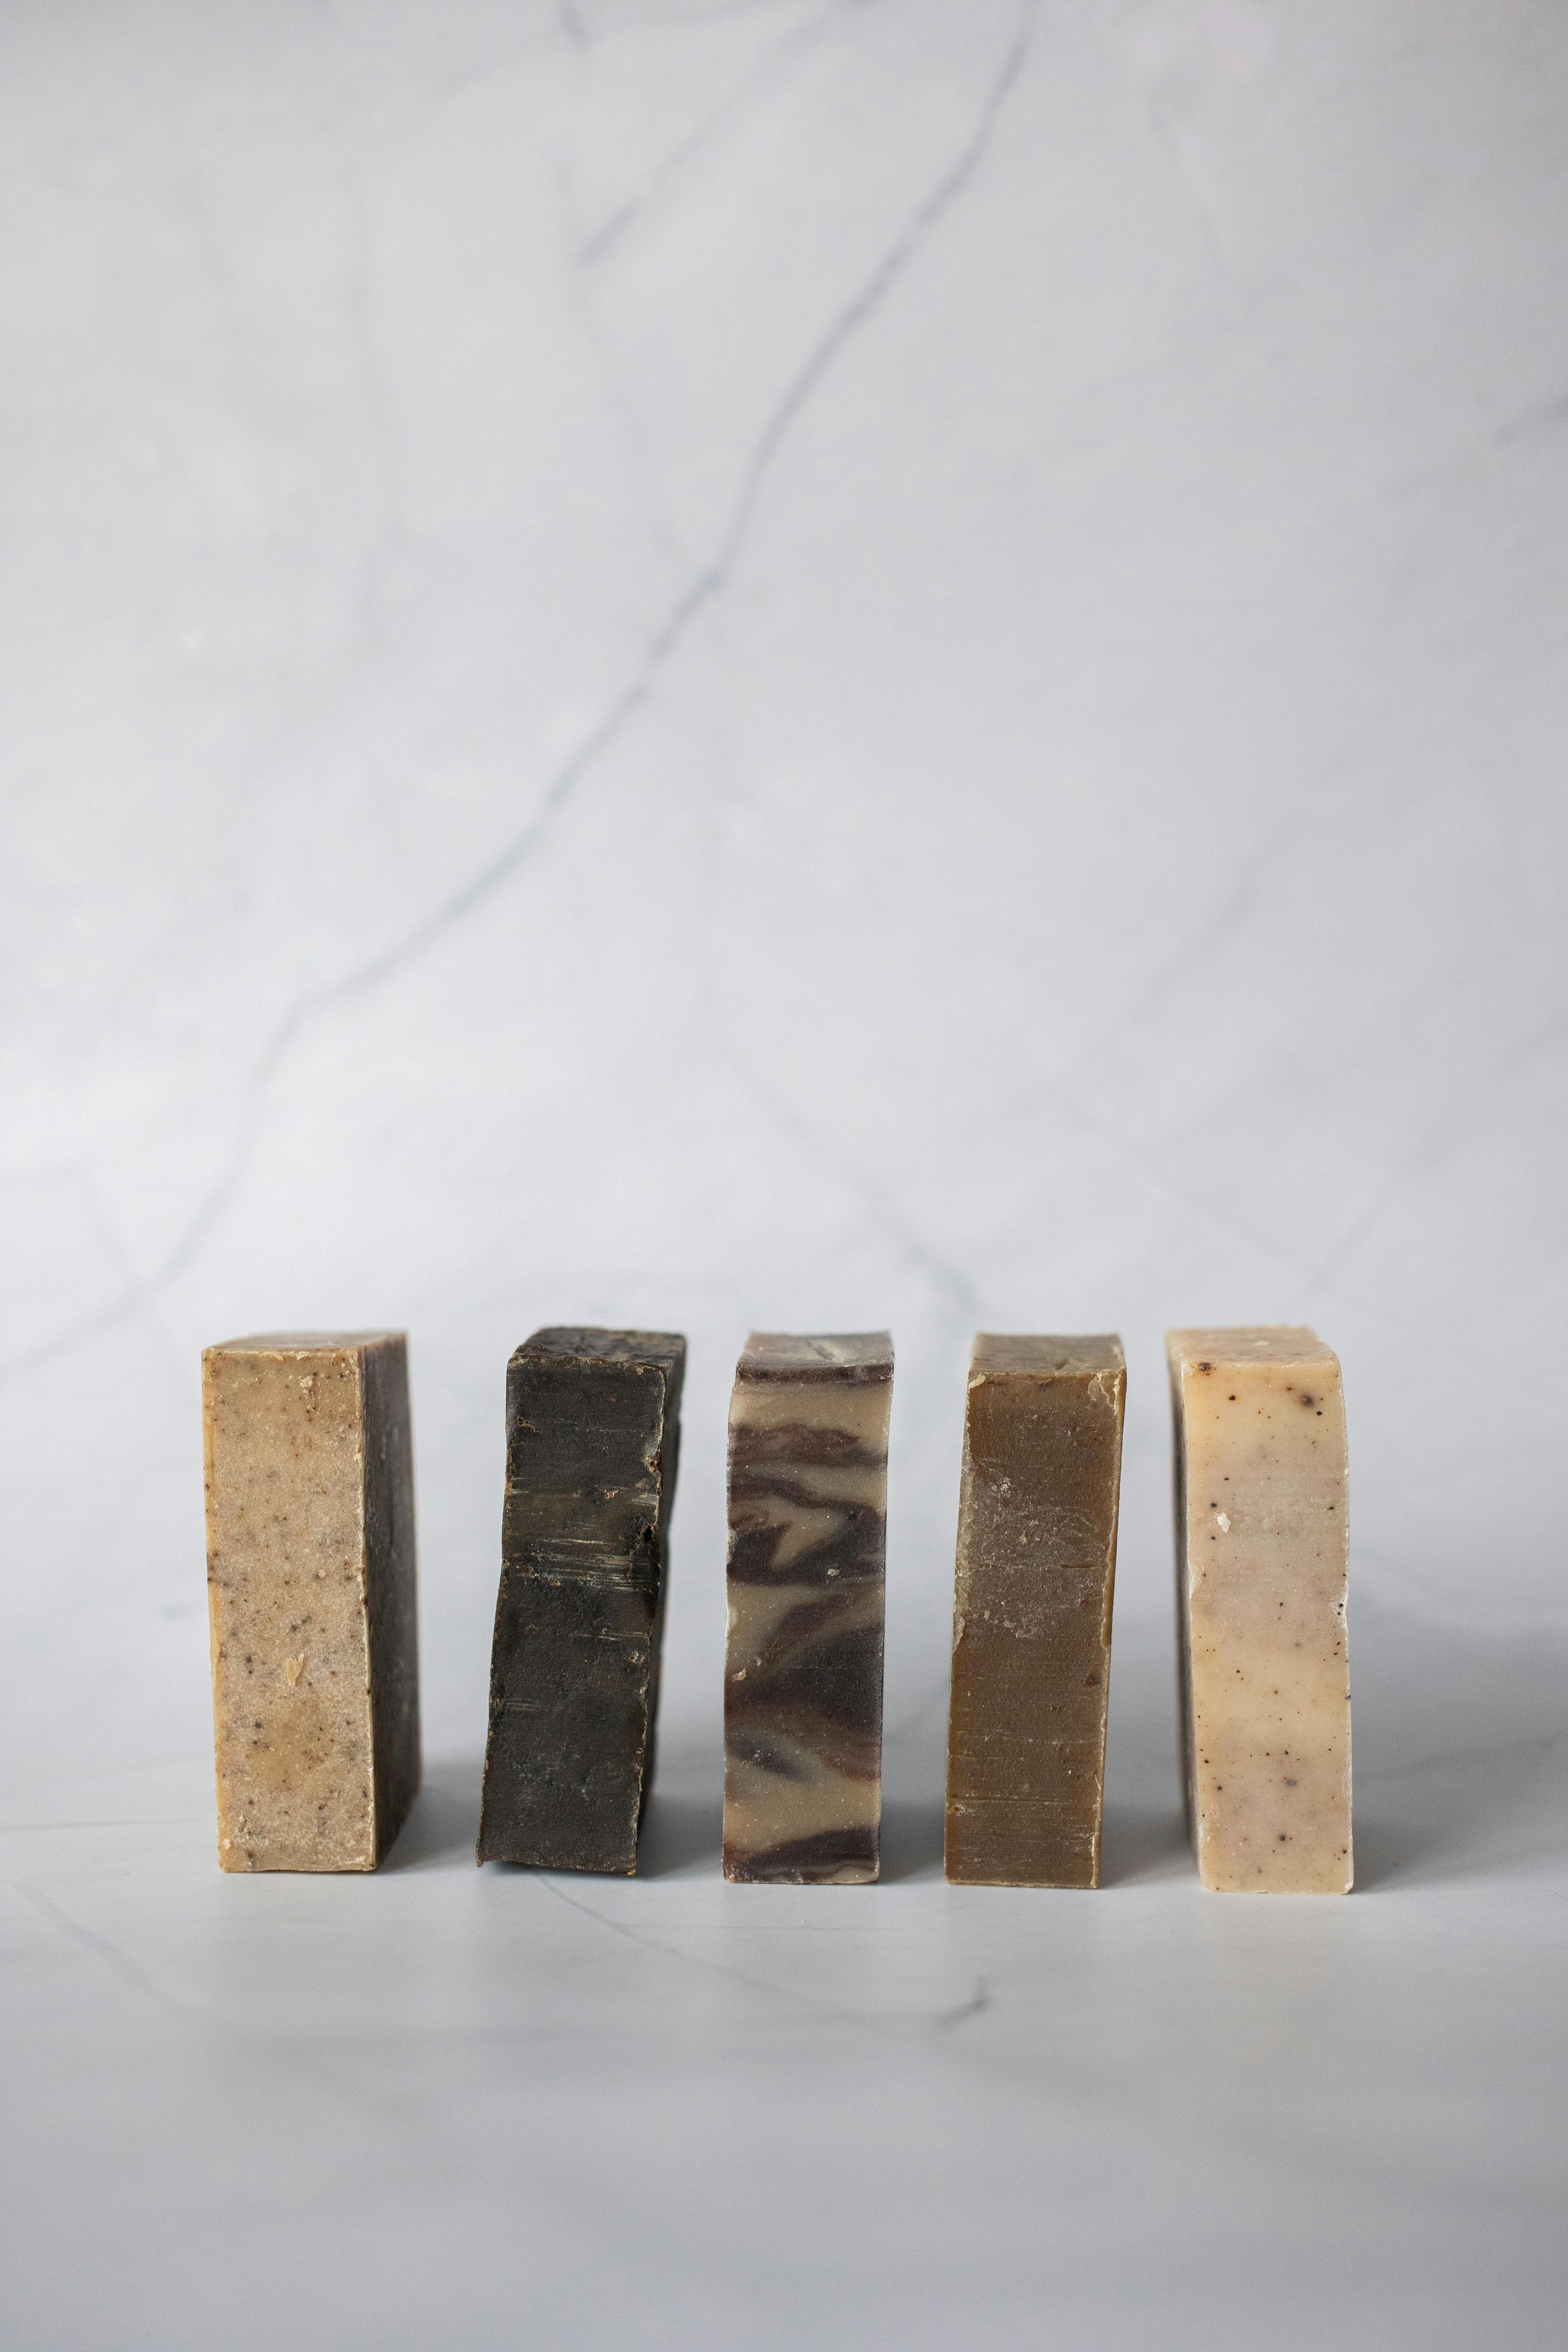 natural soaps placed in row against light background